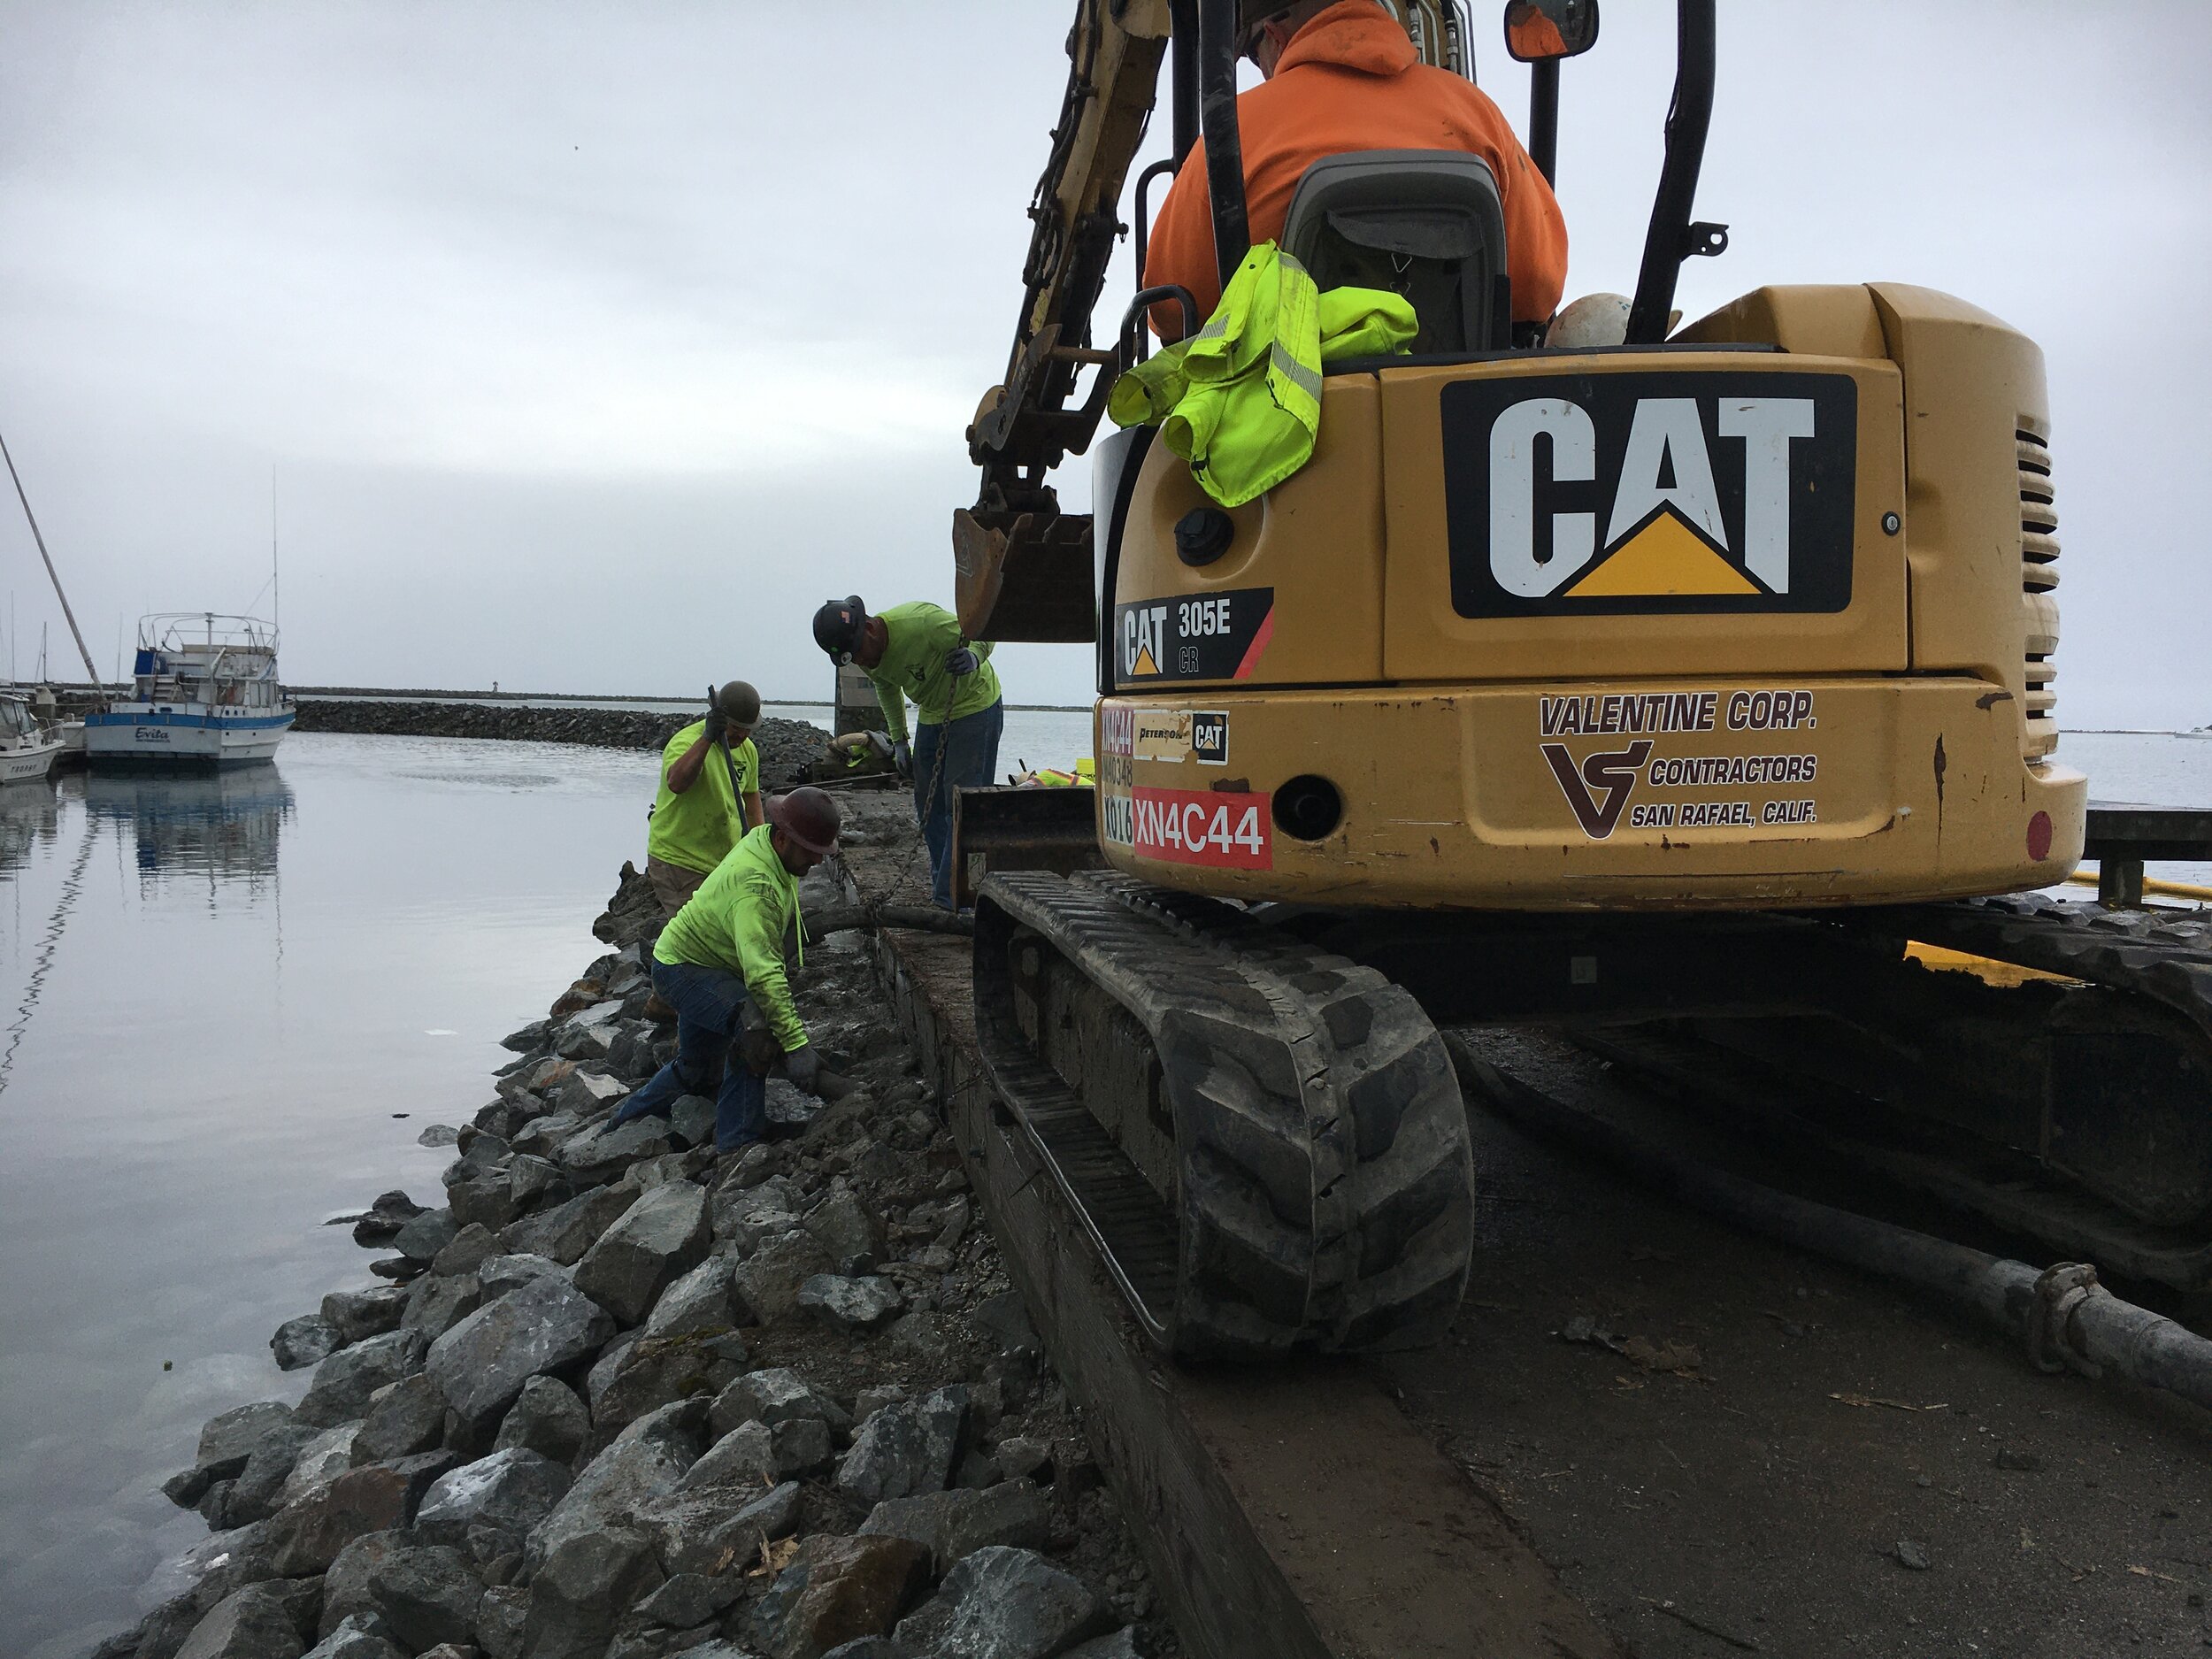   Welcome To Valentine Corporation   Project: Pillar Point Fishing Pier Rehabilitation  If It's Difficult Or Unusual, Call Us!   Contact Us  